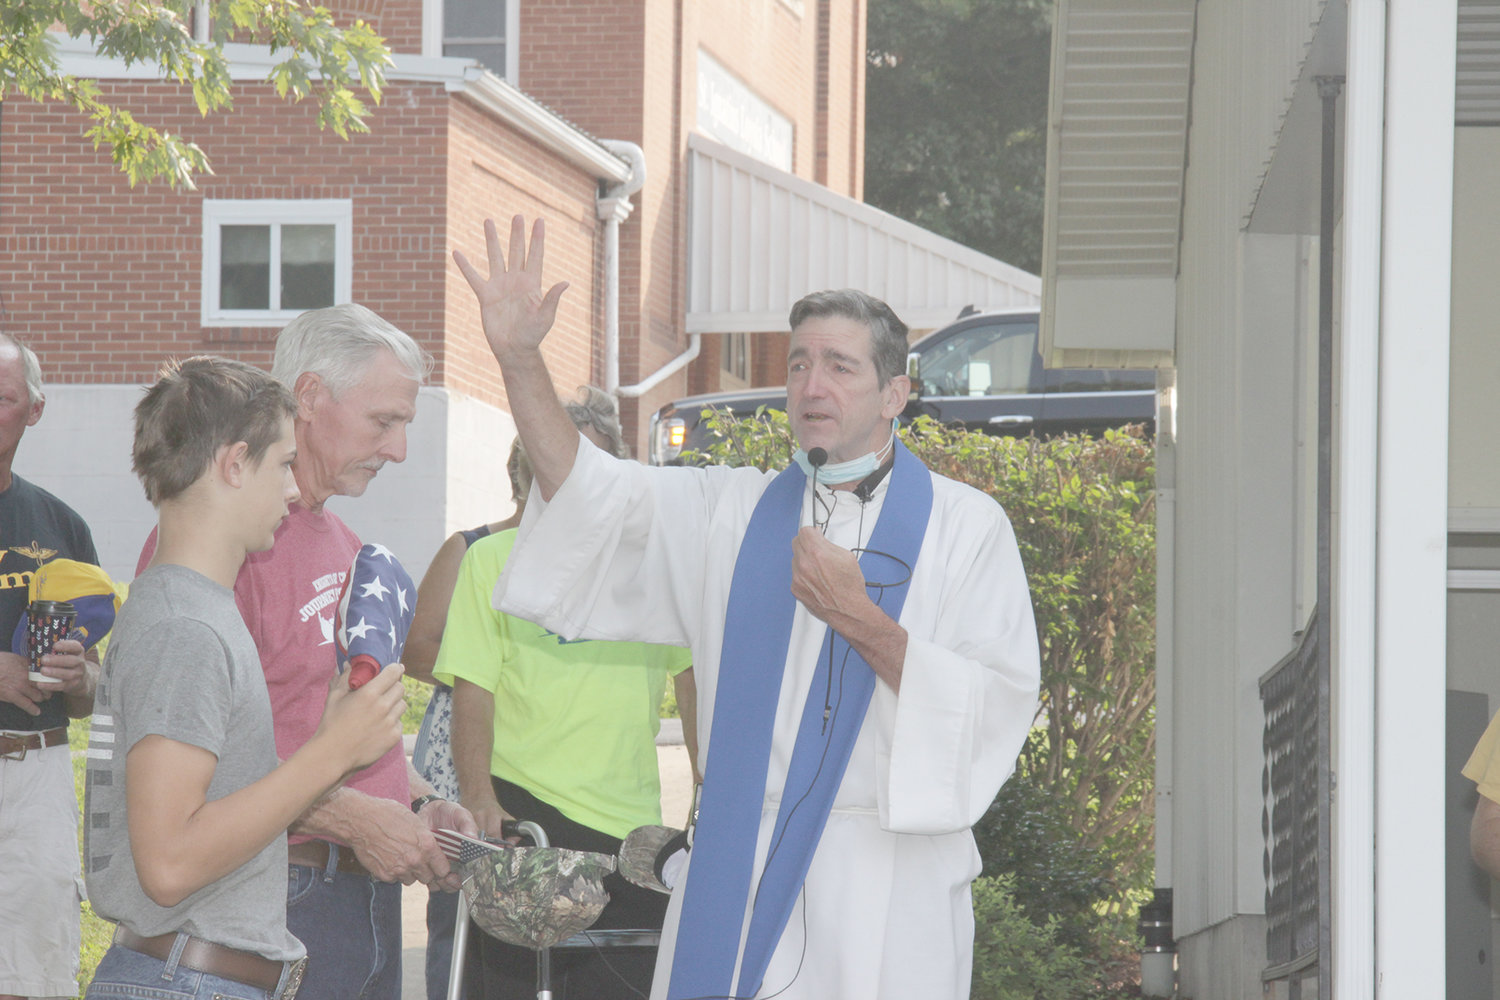 Fr. Steve Robeson blesses the fleet at St. Ignatius Parish ahead of the 2021 Journey For Charity Tractor Cruise through southern Warren County.